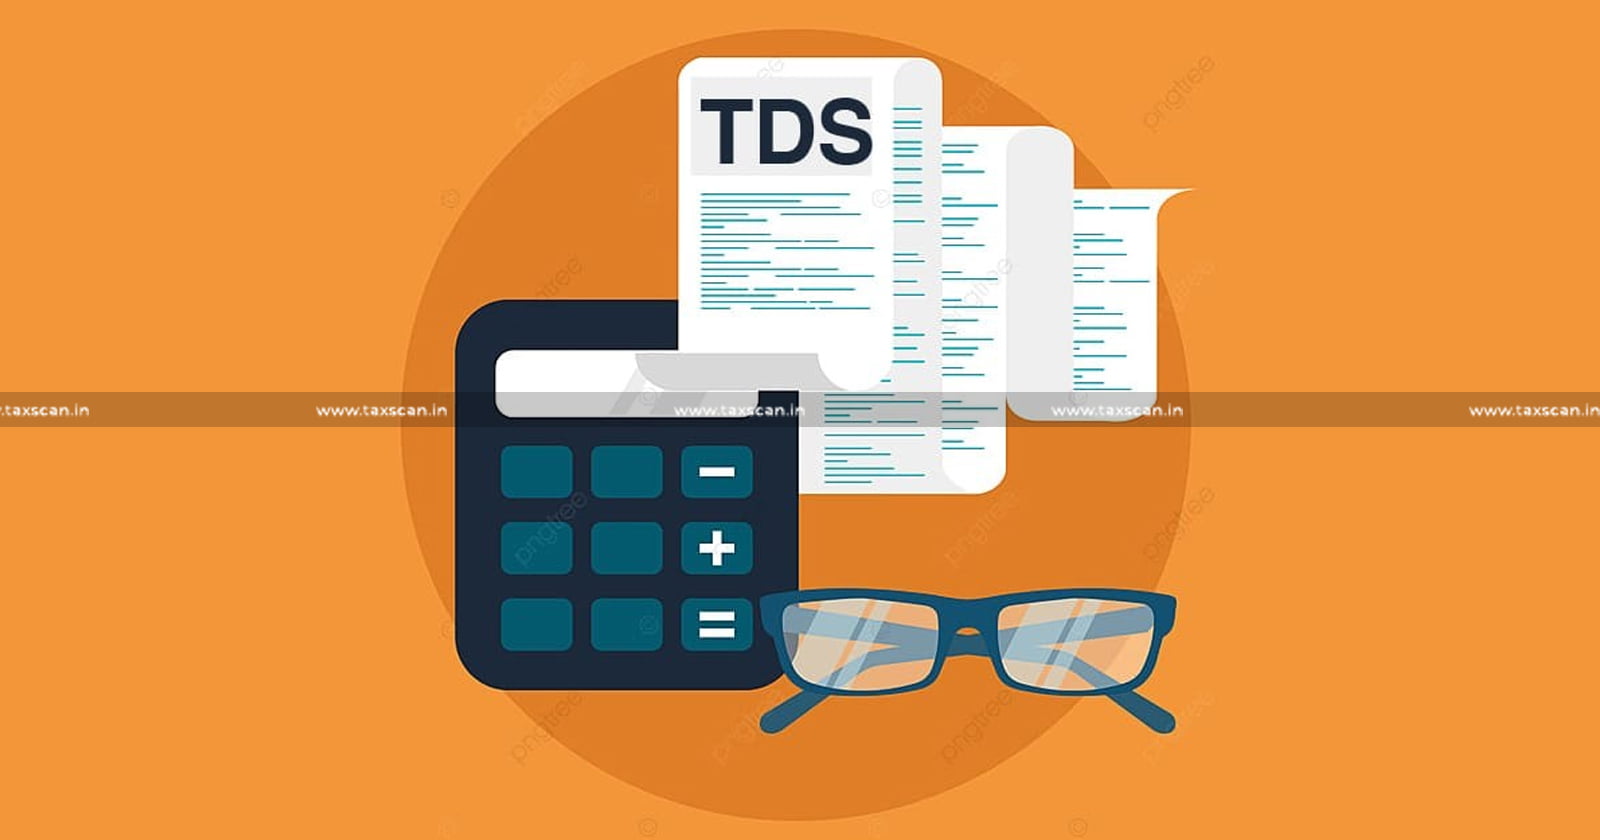 Claim of deduction - deduction - Claim - Income Tax Act - Non Deduction of TDS - TDS - Deduction of TDS - ITAT Dismisses Appeal of Assessee - ITAT - Assessee - Appeal of Assessee - Income Tax - taxscan